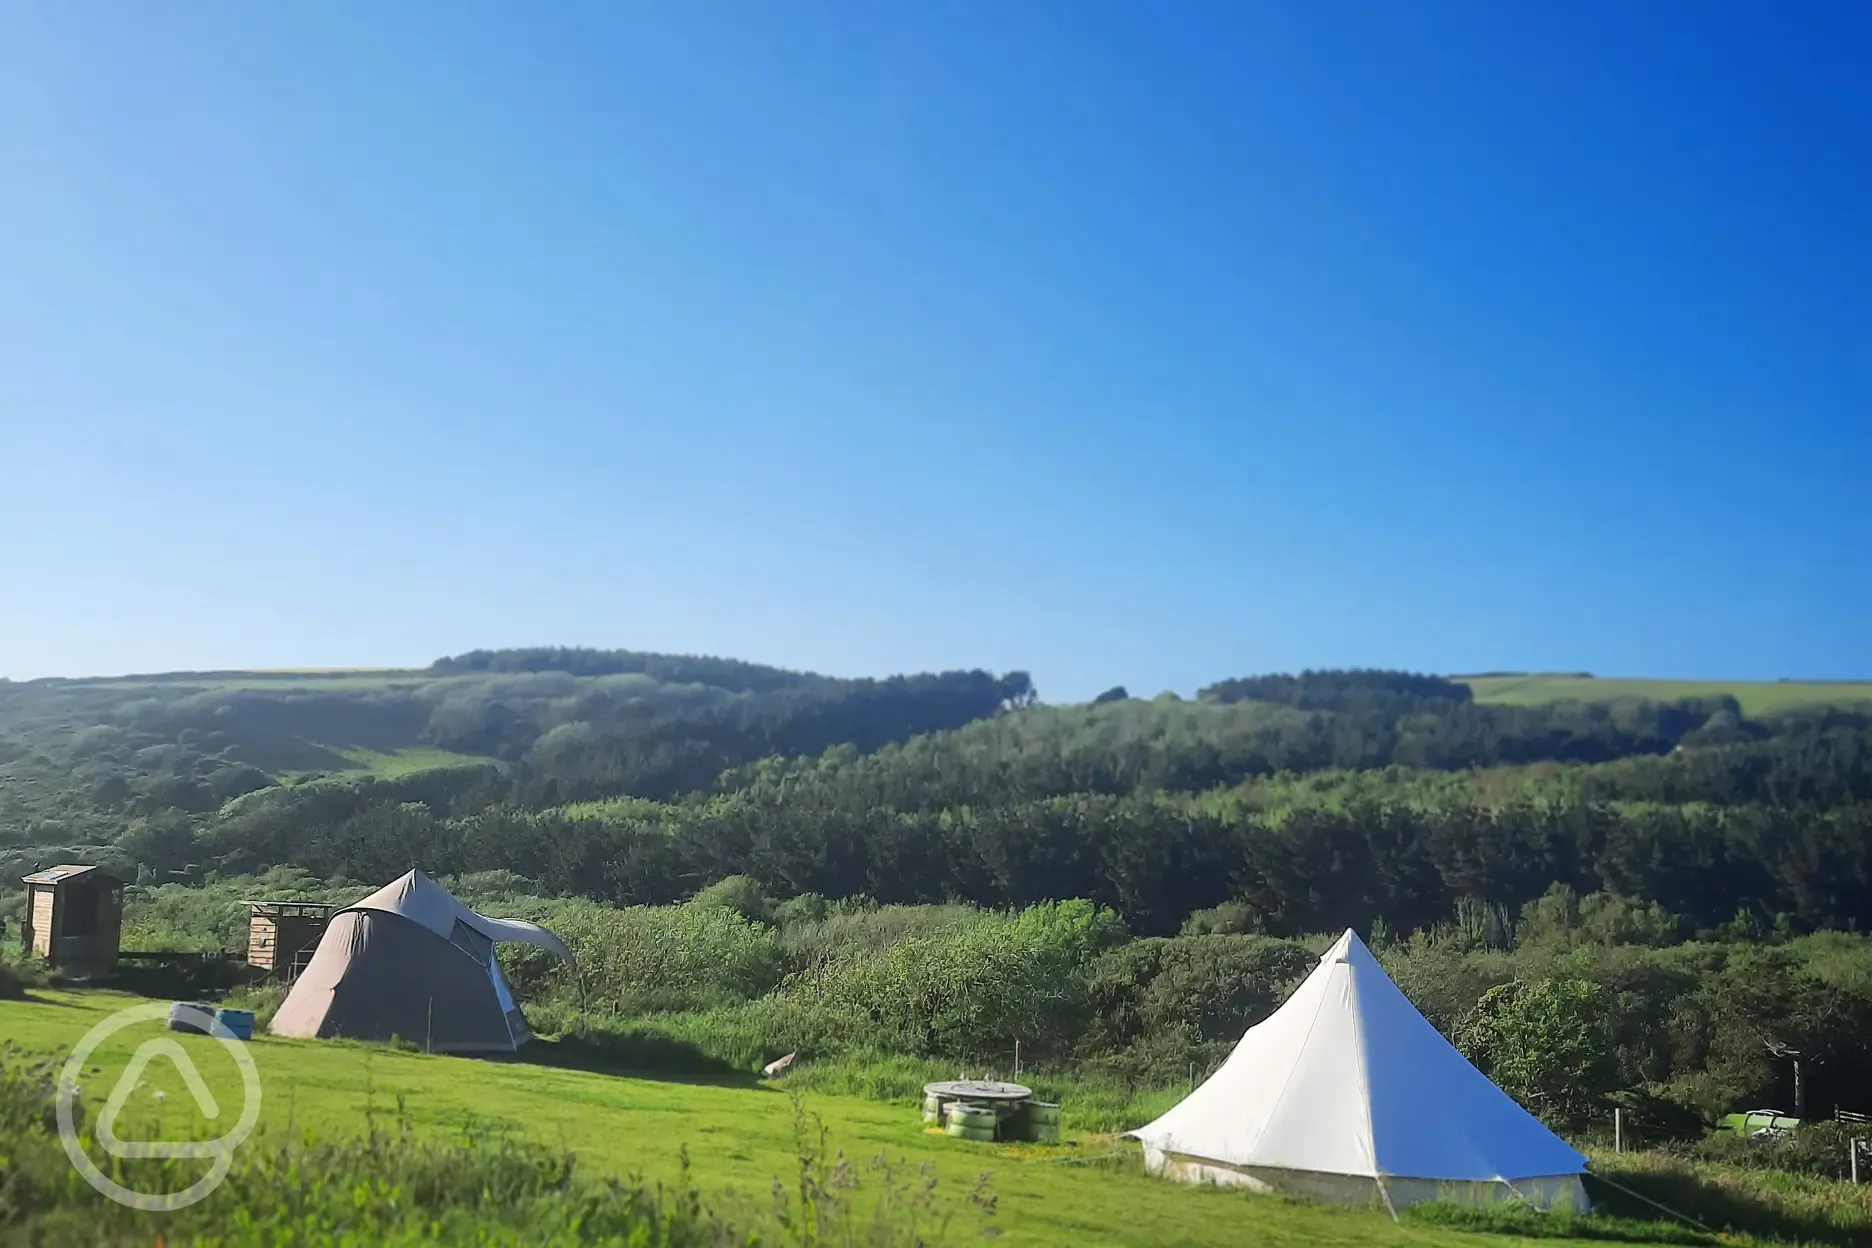 Bell tents and grass pitches